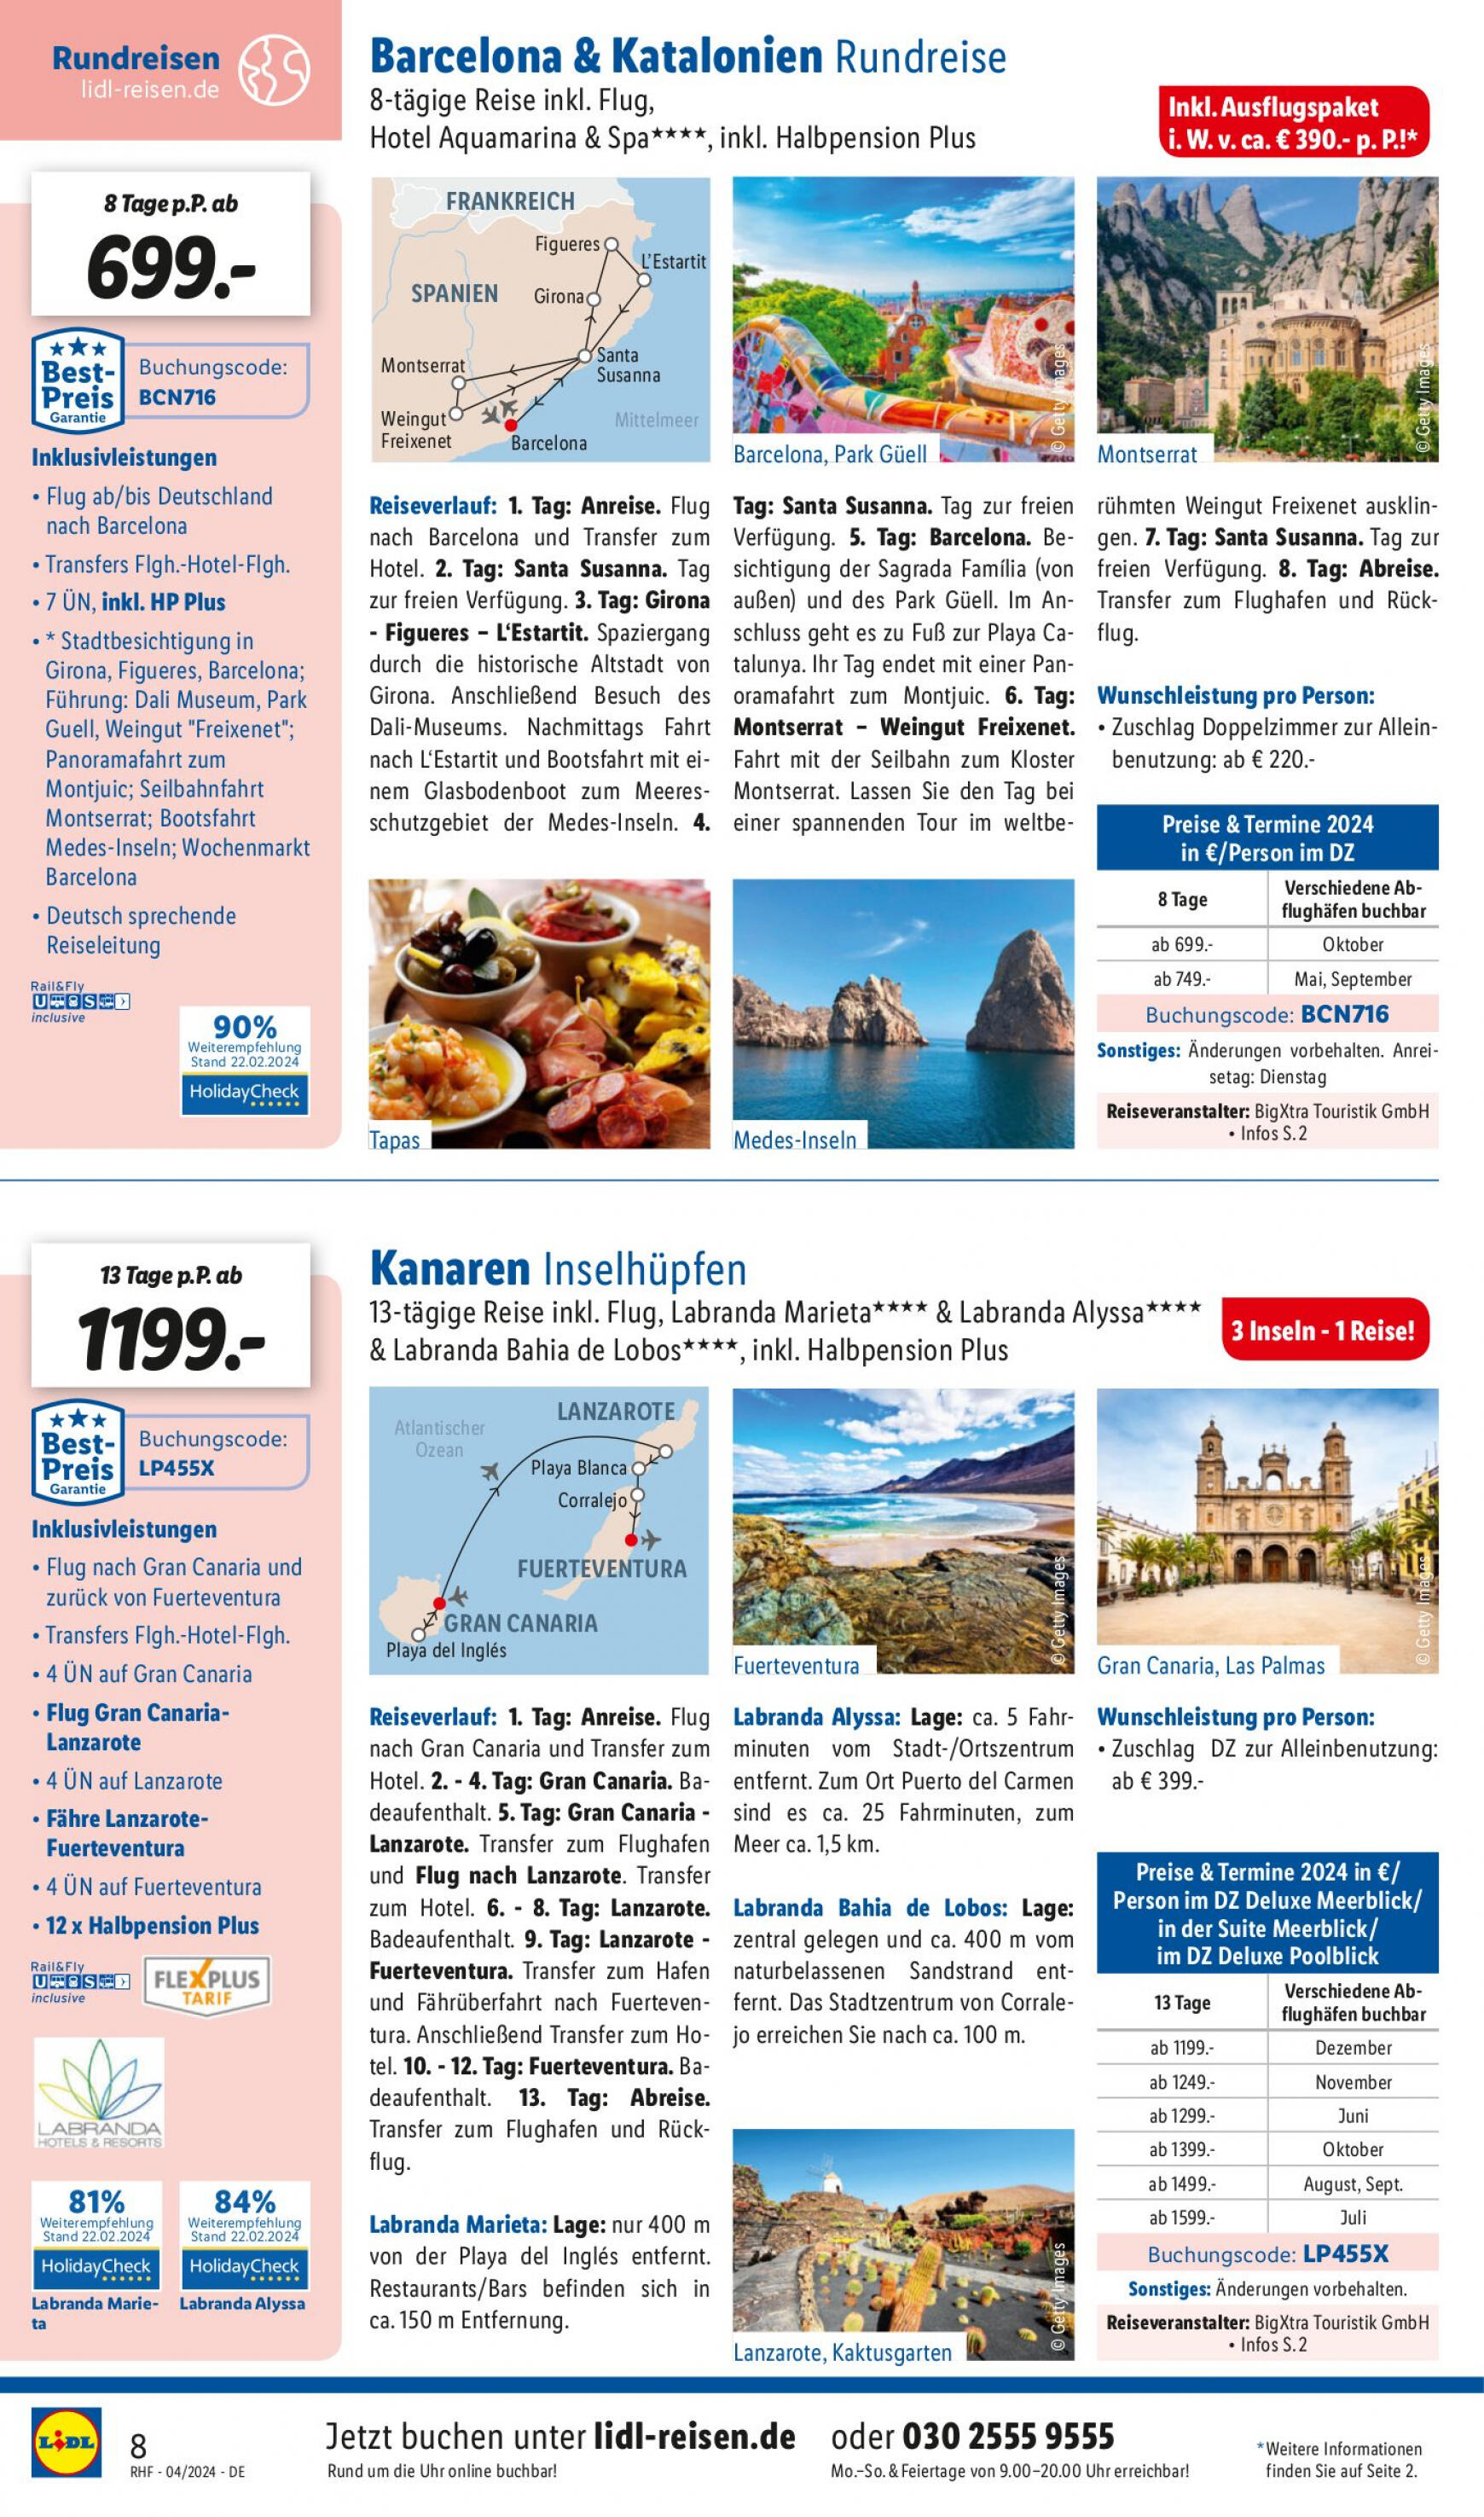 lidl - Flyer Lidl - April Reise-Highlights aktuell 27.03. - 30.04. - page: 8